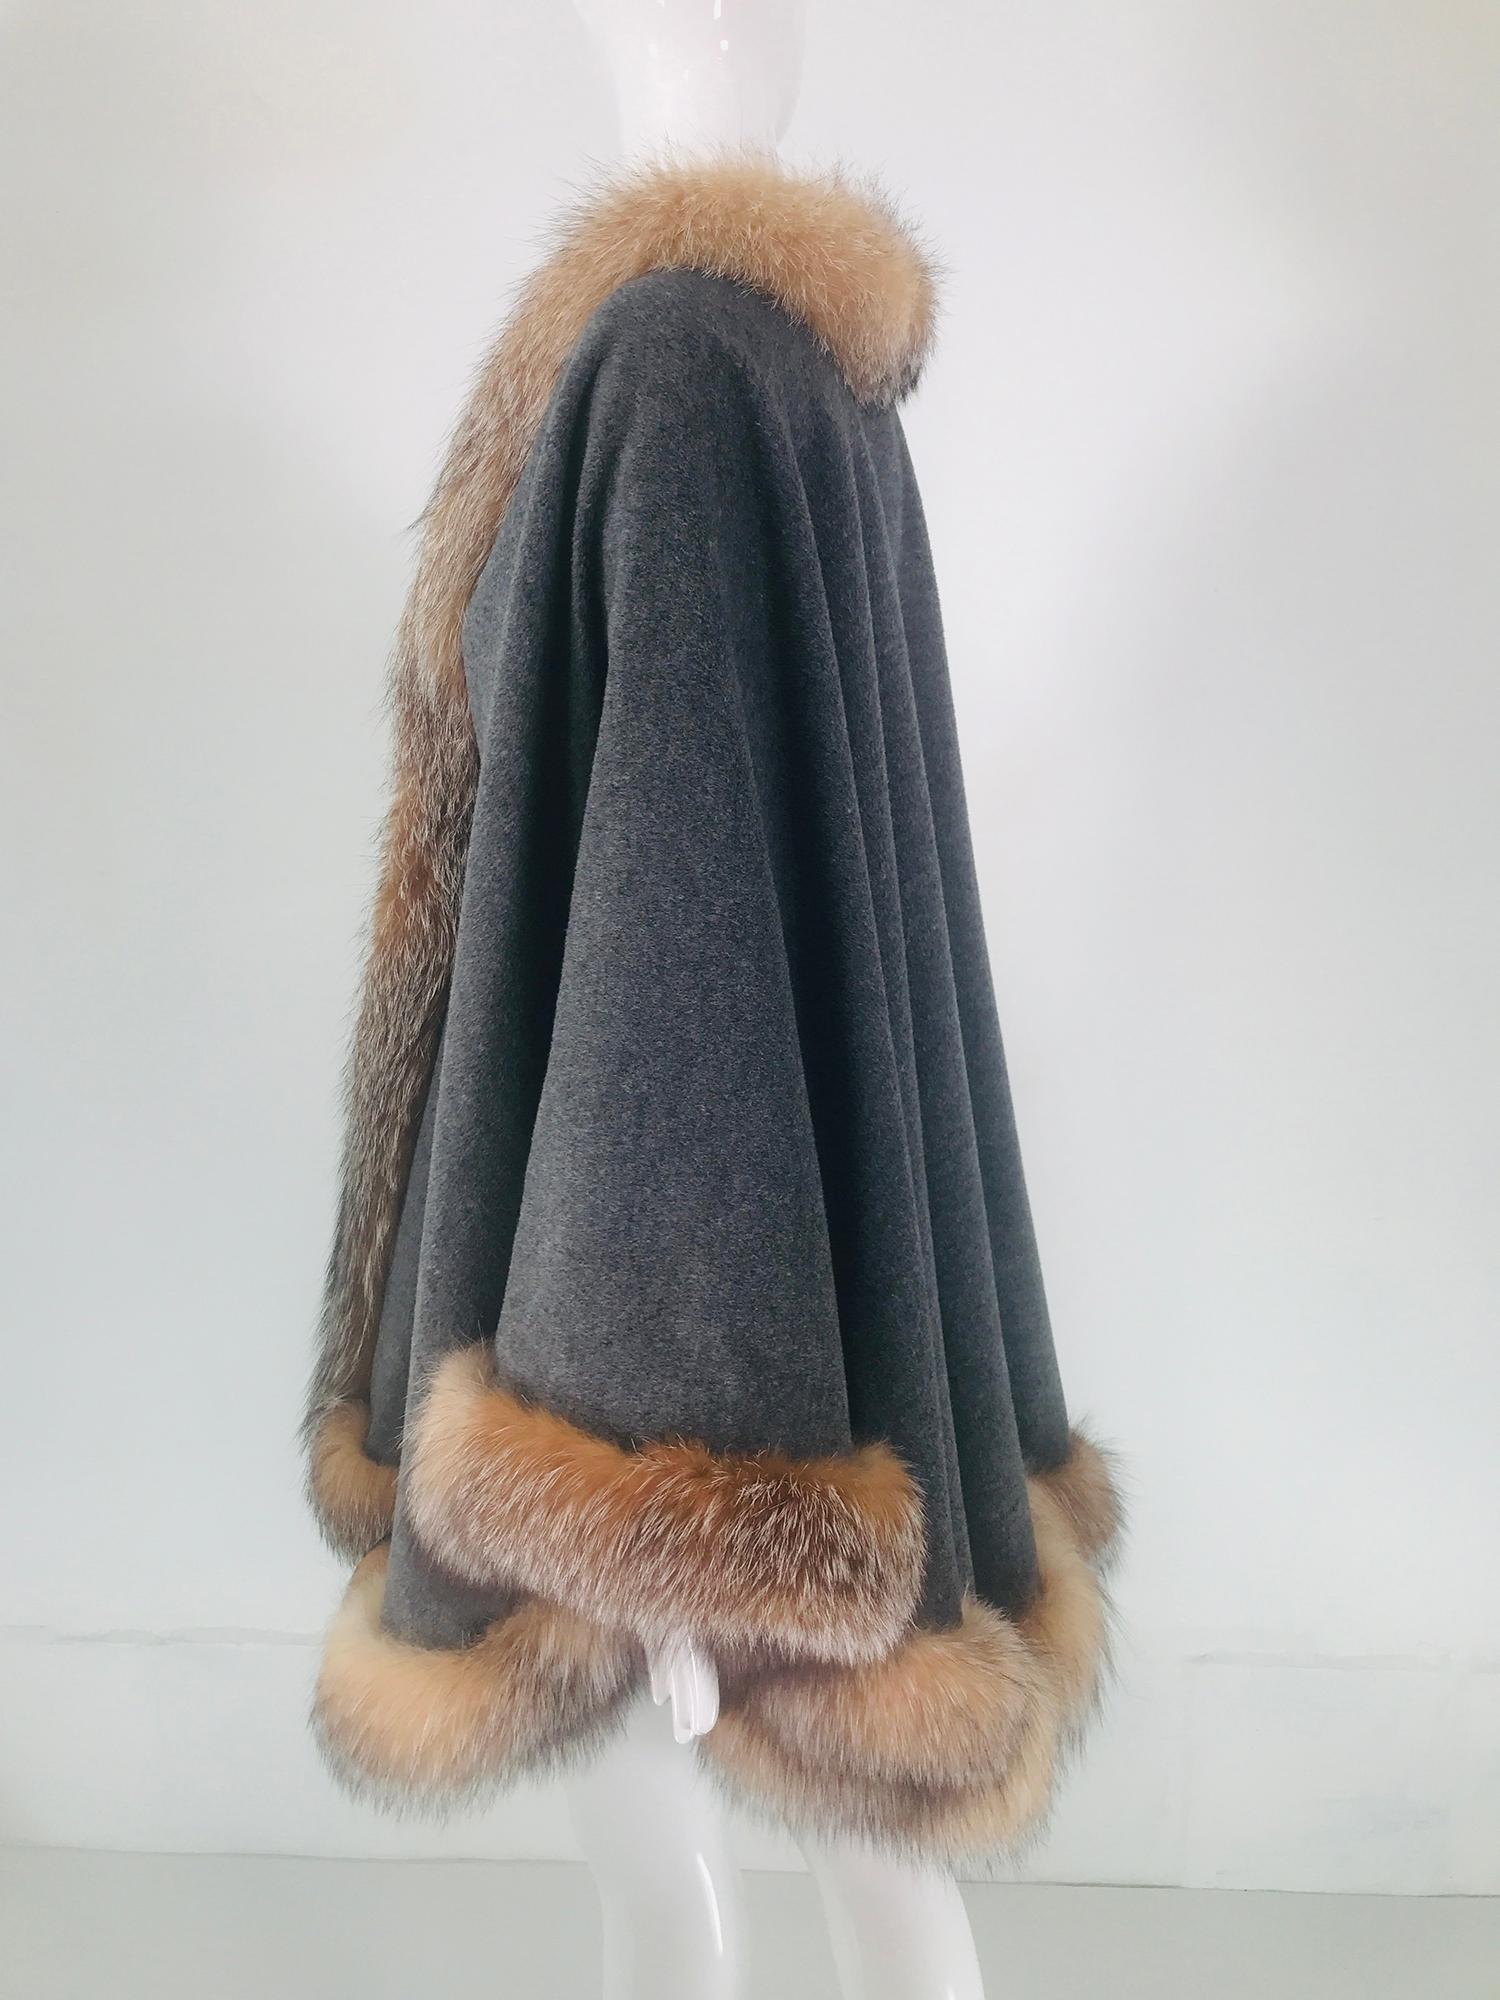 Sprung Freres Paris Red Fox Wool/Cashmere Reversible Cape Grey/Camel Tan OS 10